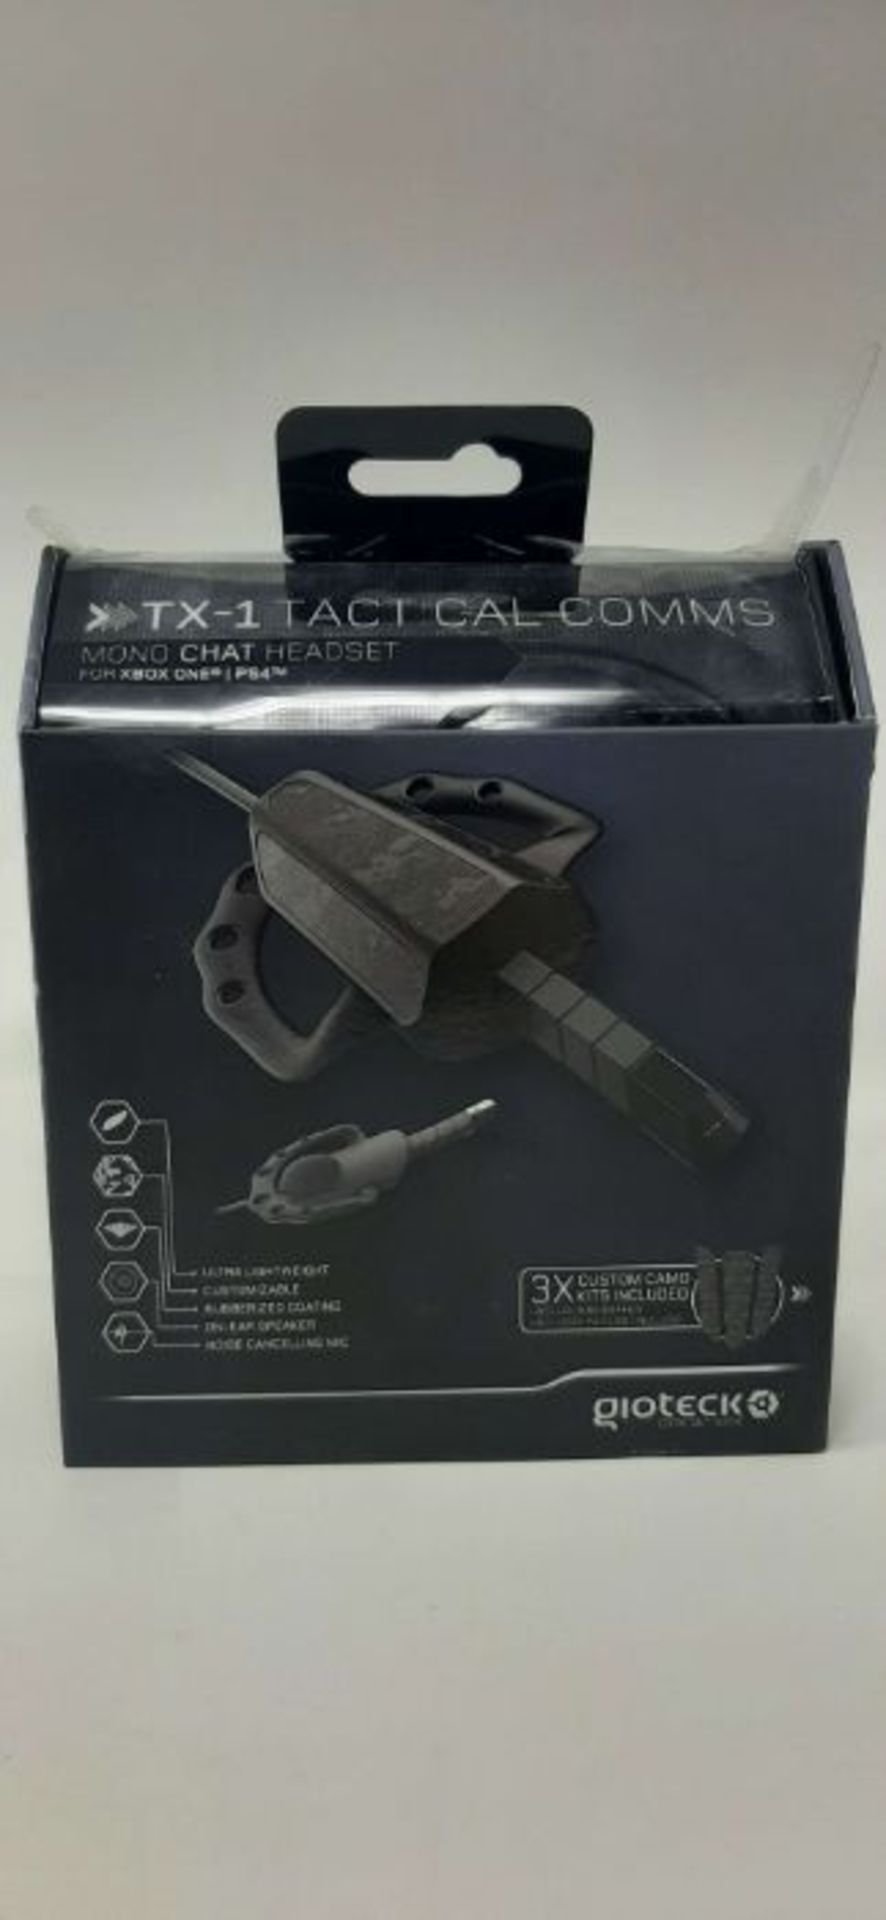 TX 1 TACTICAL COMMS MONO CHAT HEADSET - Image 2 of 2